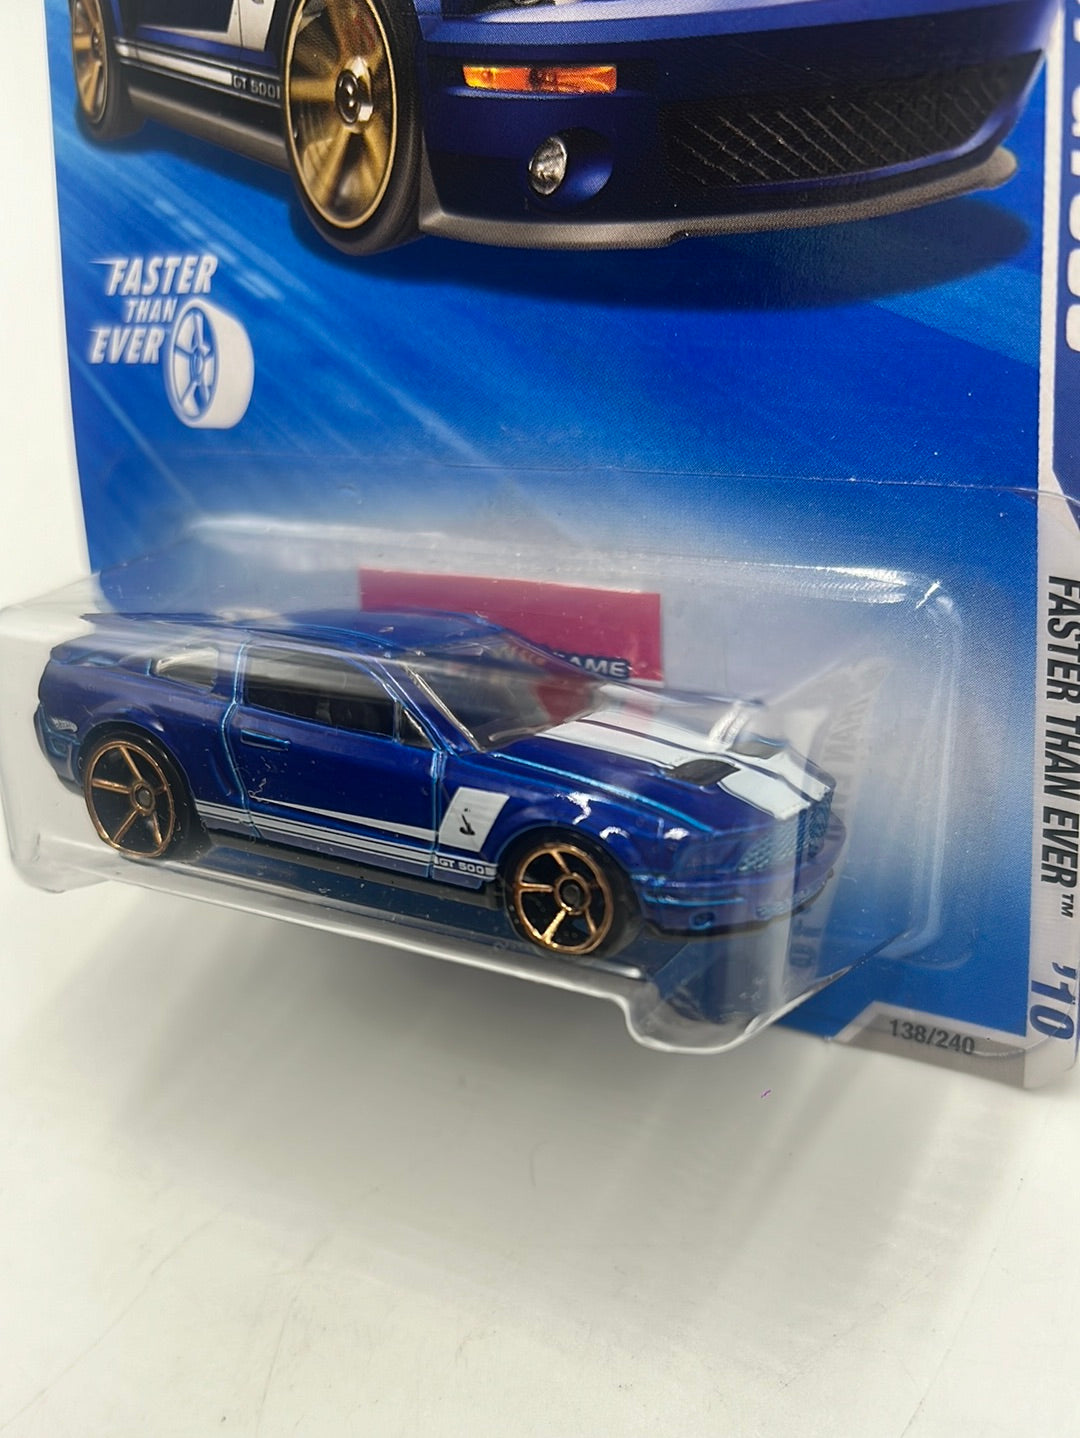 2010 Hot Wheels Faster Than Ever ‘07 Ford Shelby GT500 Blue 138/240 27G